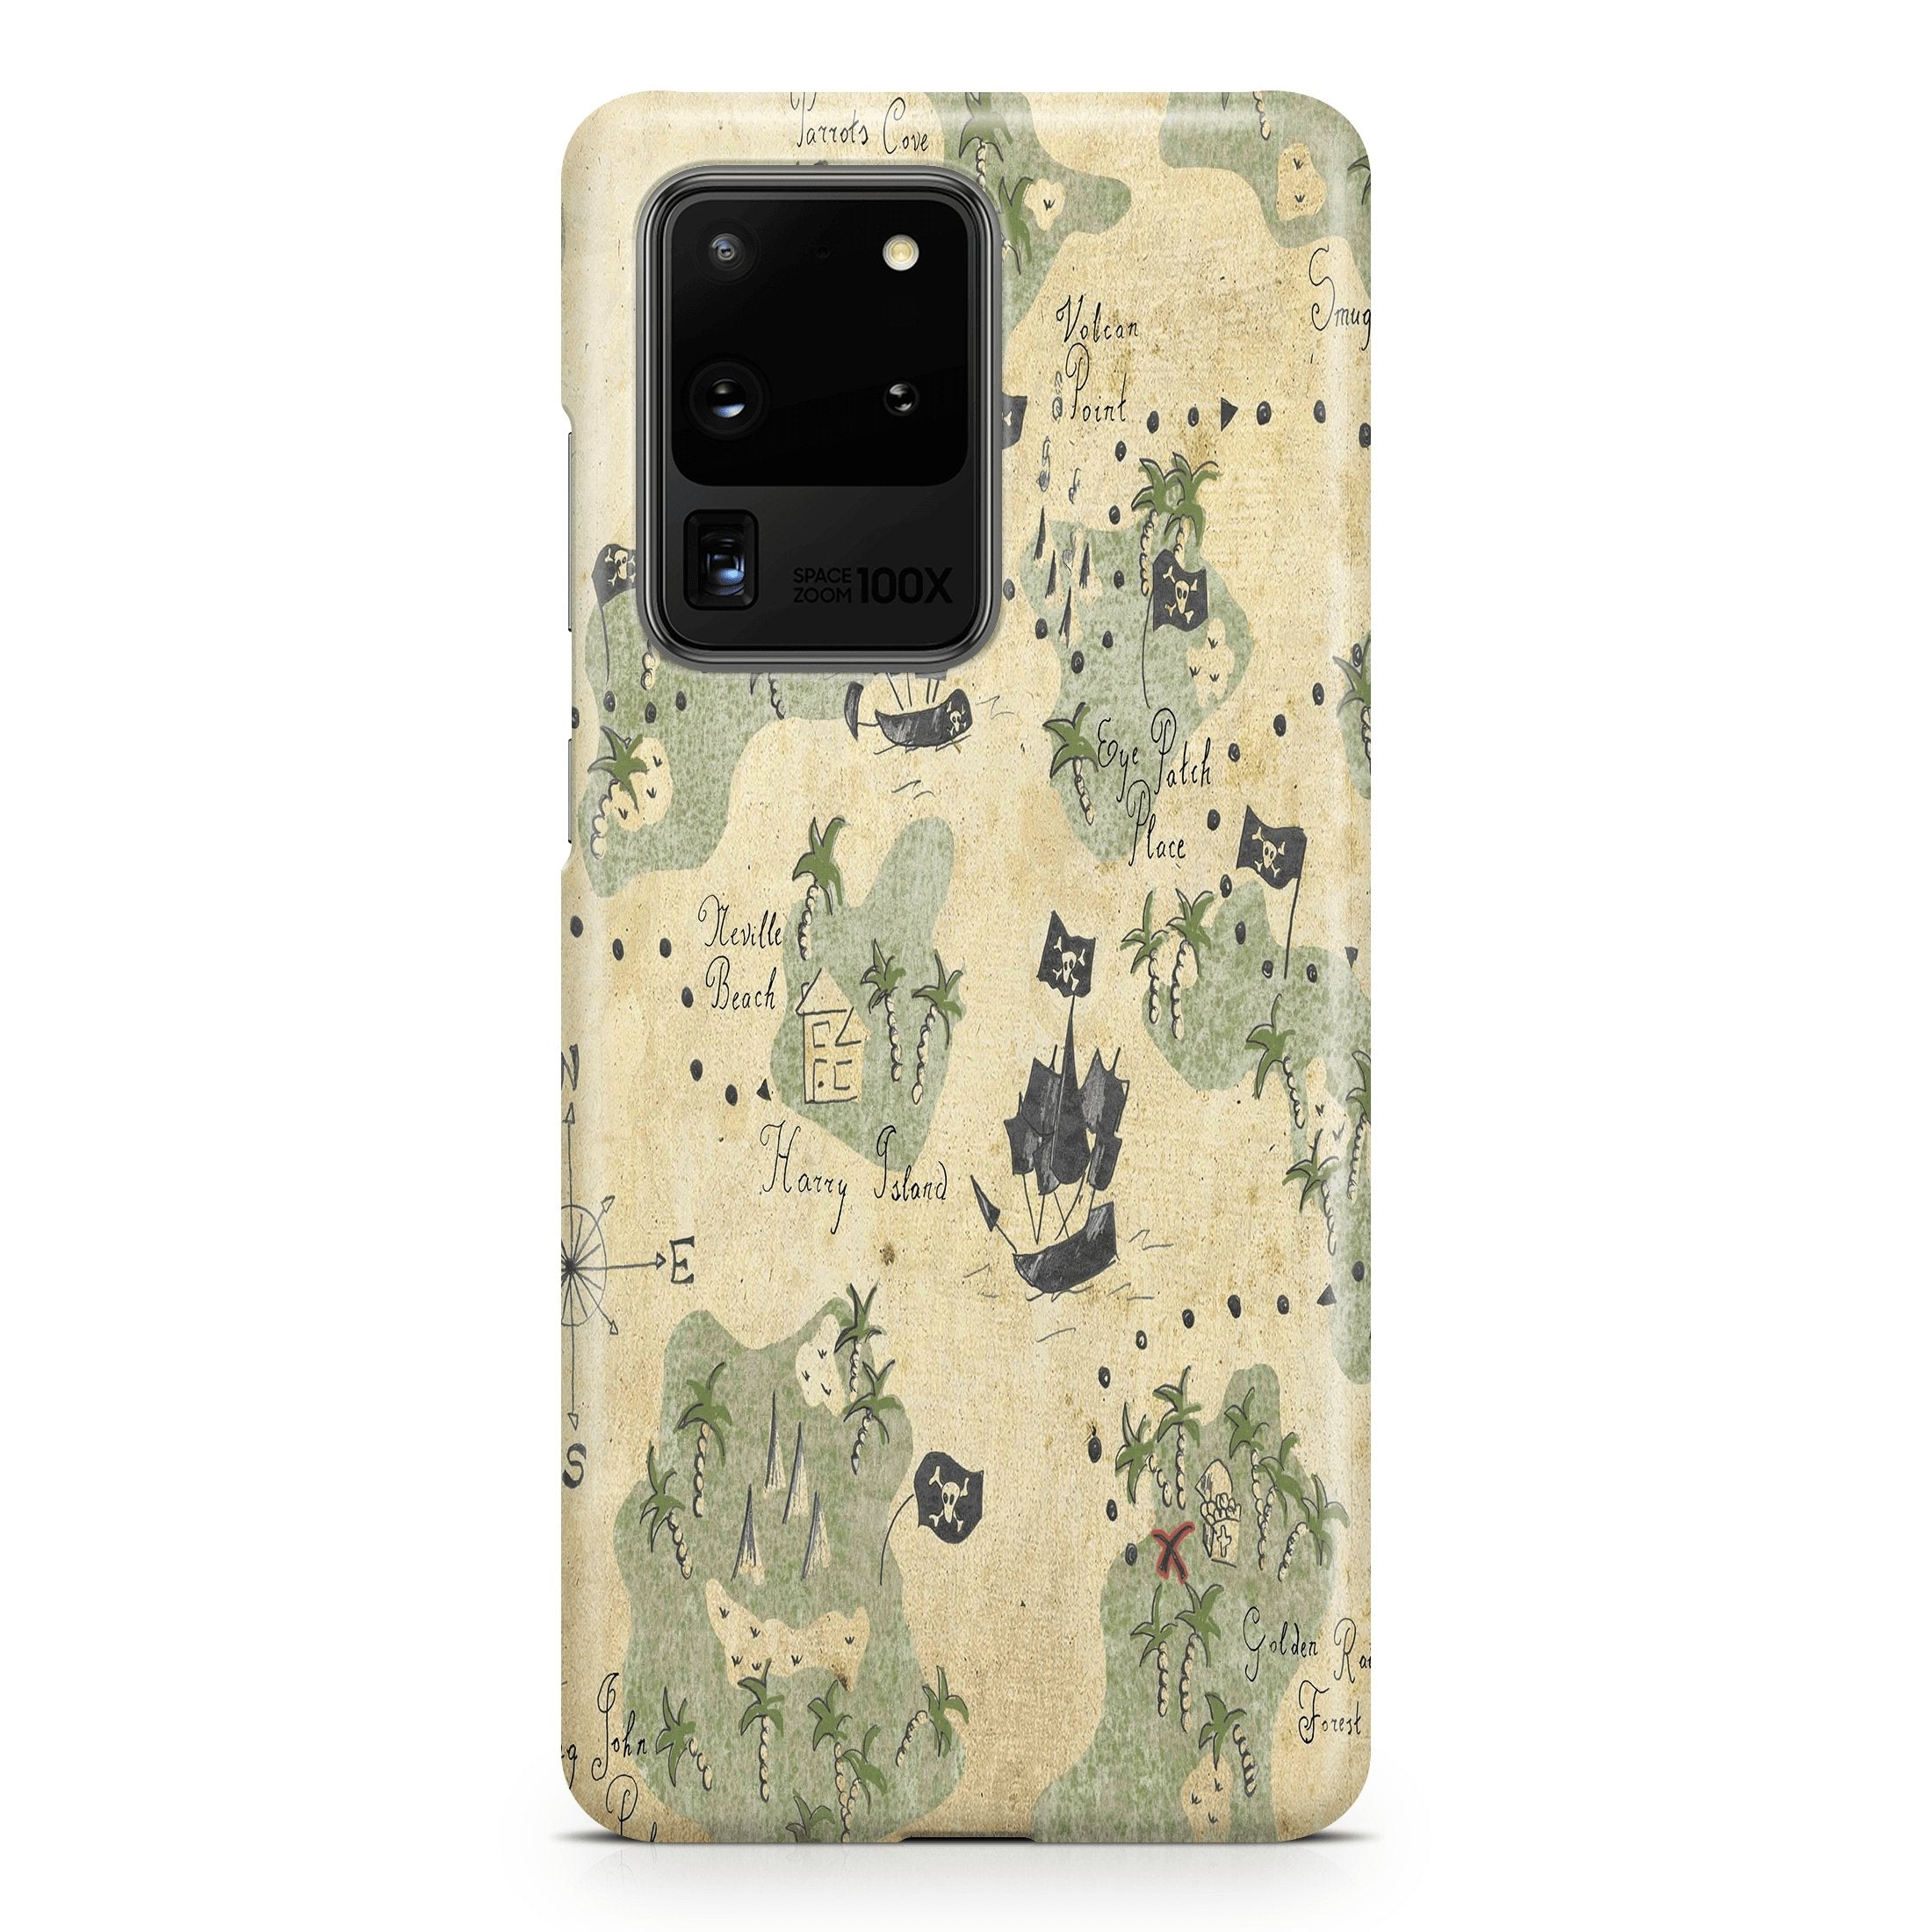 Pirate Map - Samsung phone case designs by CaseSwagger